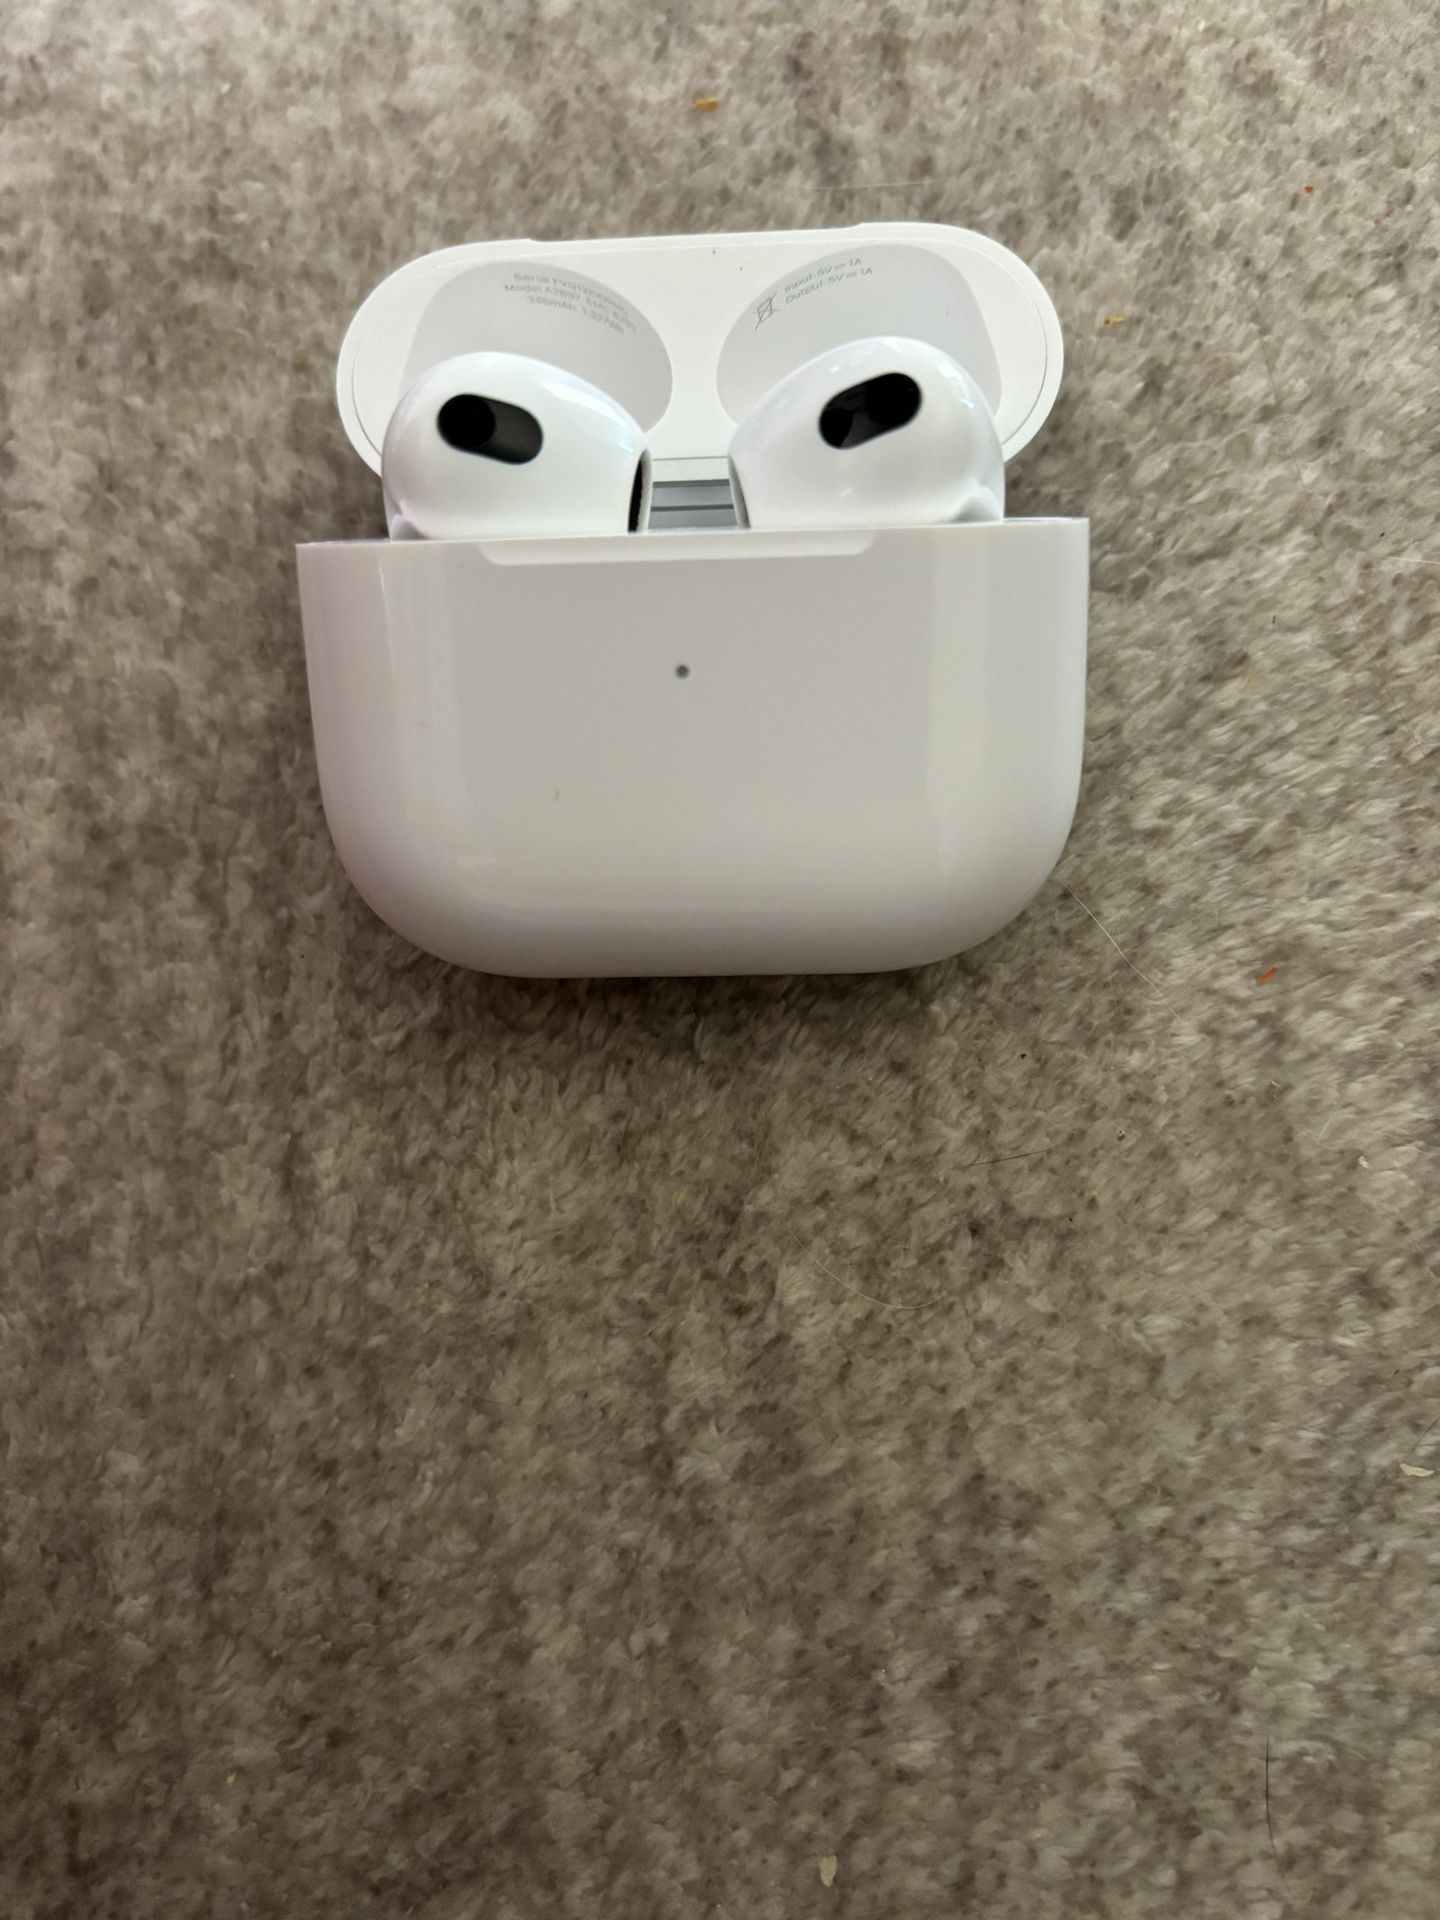 Airpods generation 3 